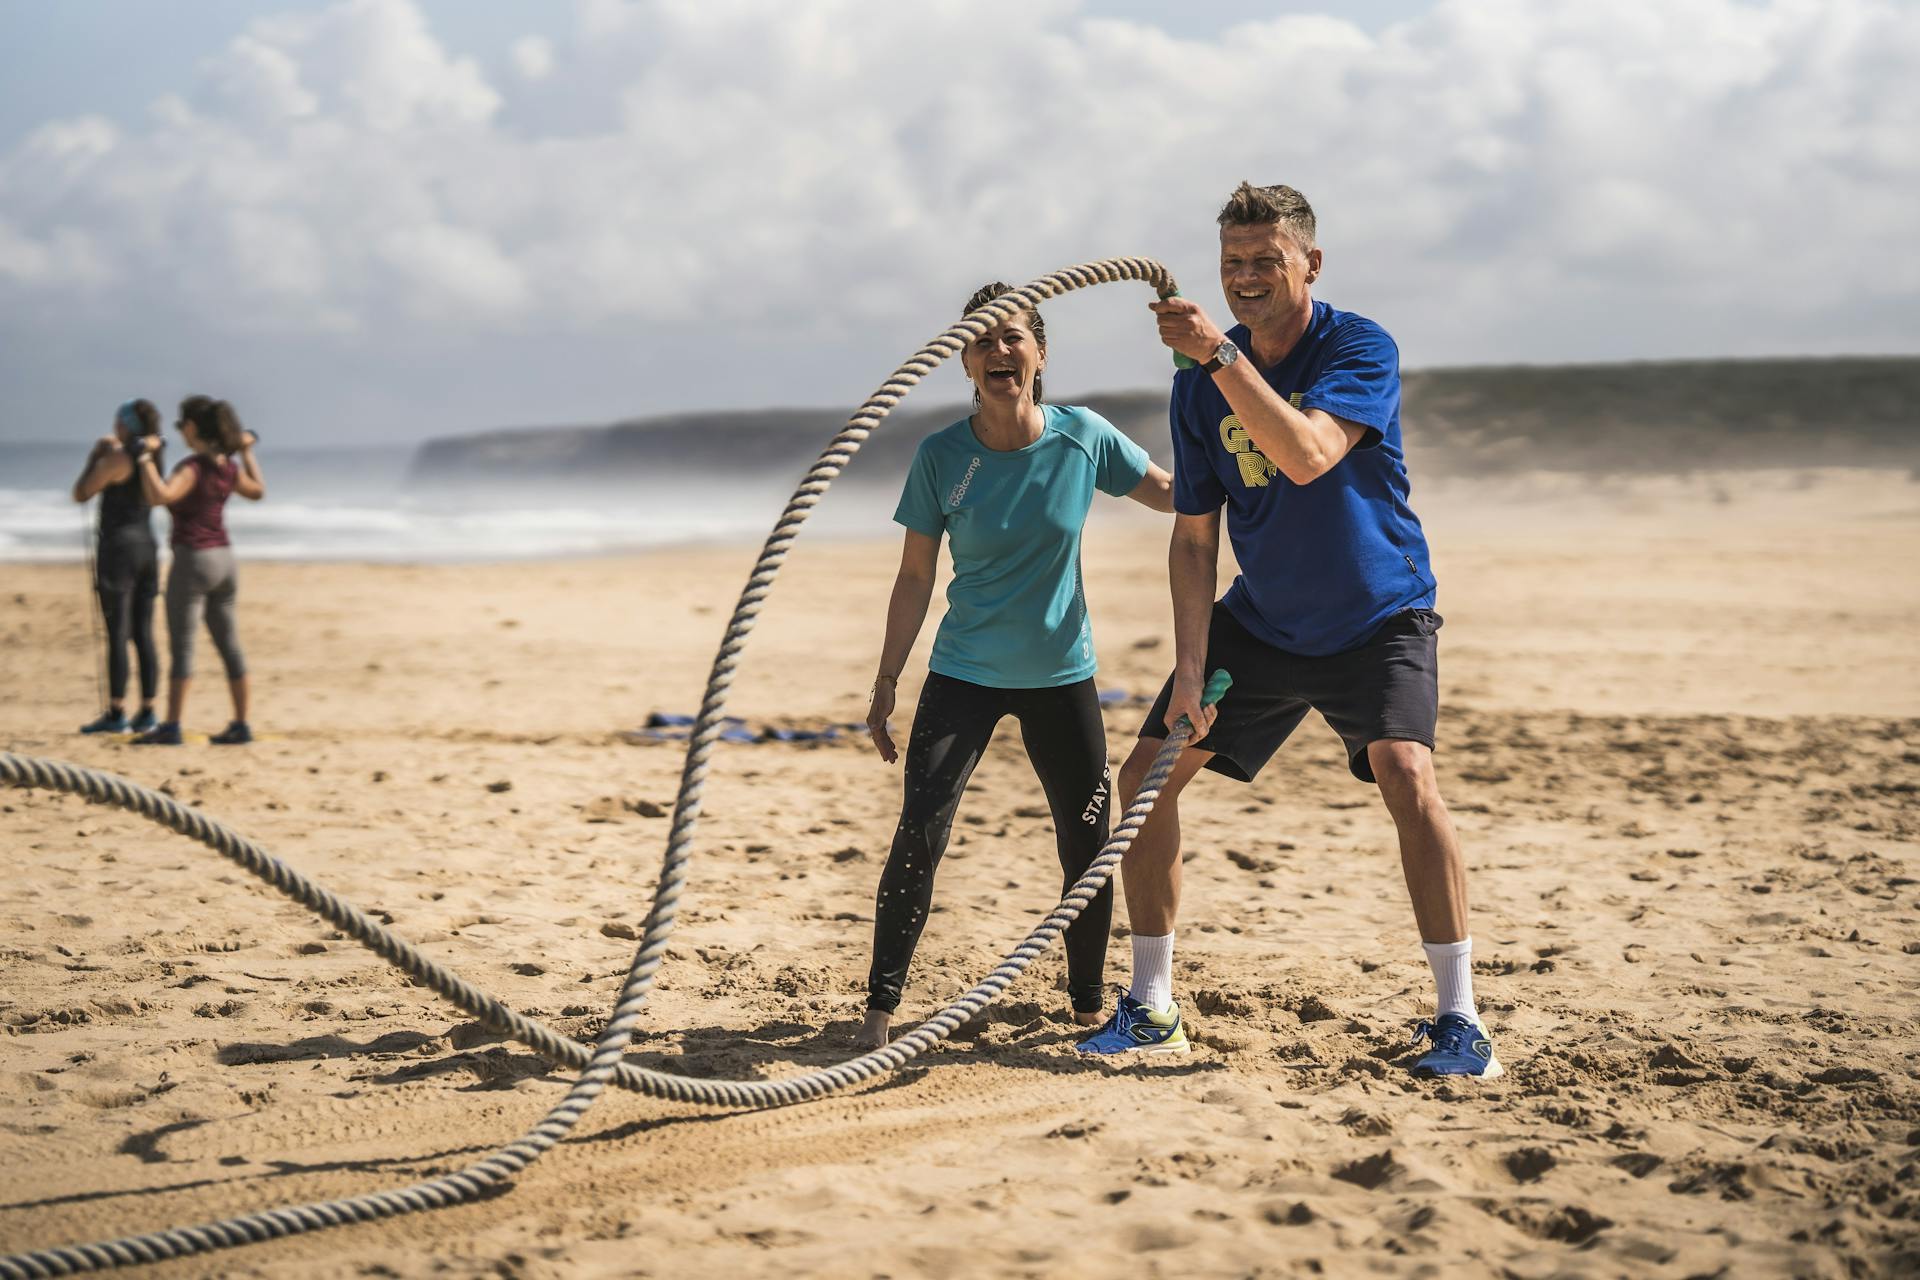 Battlerope Workout am Strand in Portugal